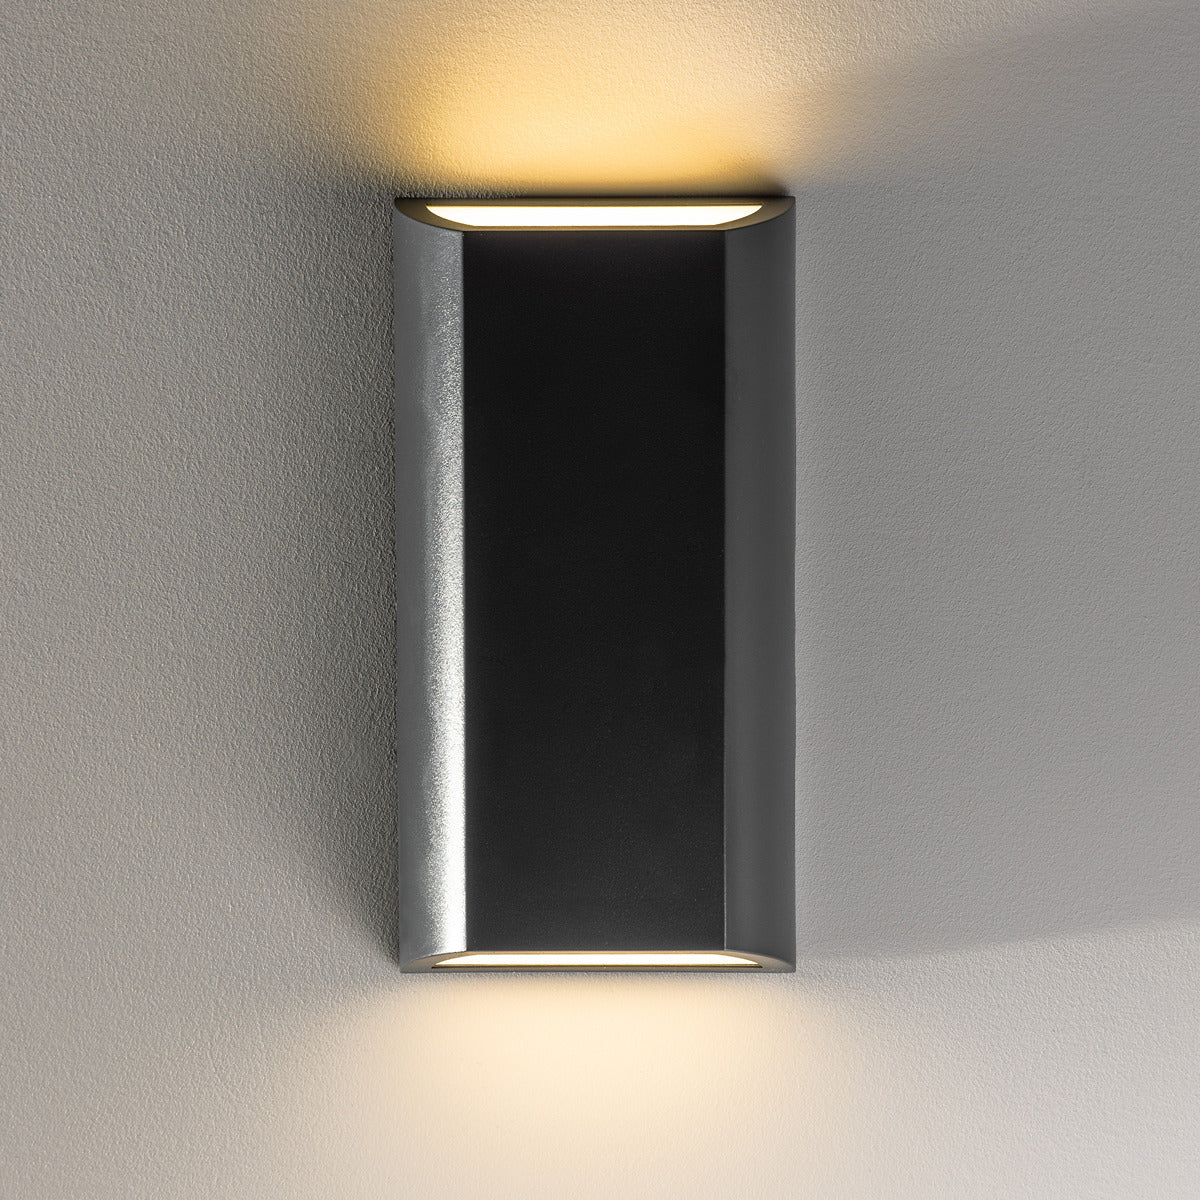 Come explore our premium-quality WILMA dark grey rectangular wall light by CGC! This outdoor wall light provides a double-sided lighting system, with a rectangular shape made of polycarbonate body, making it weather and rust-proof with opal diffusers.